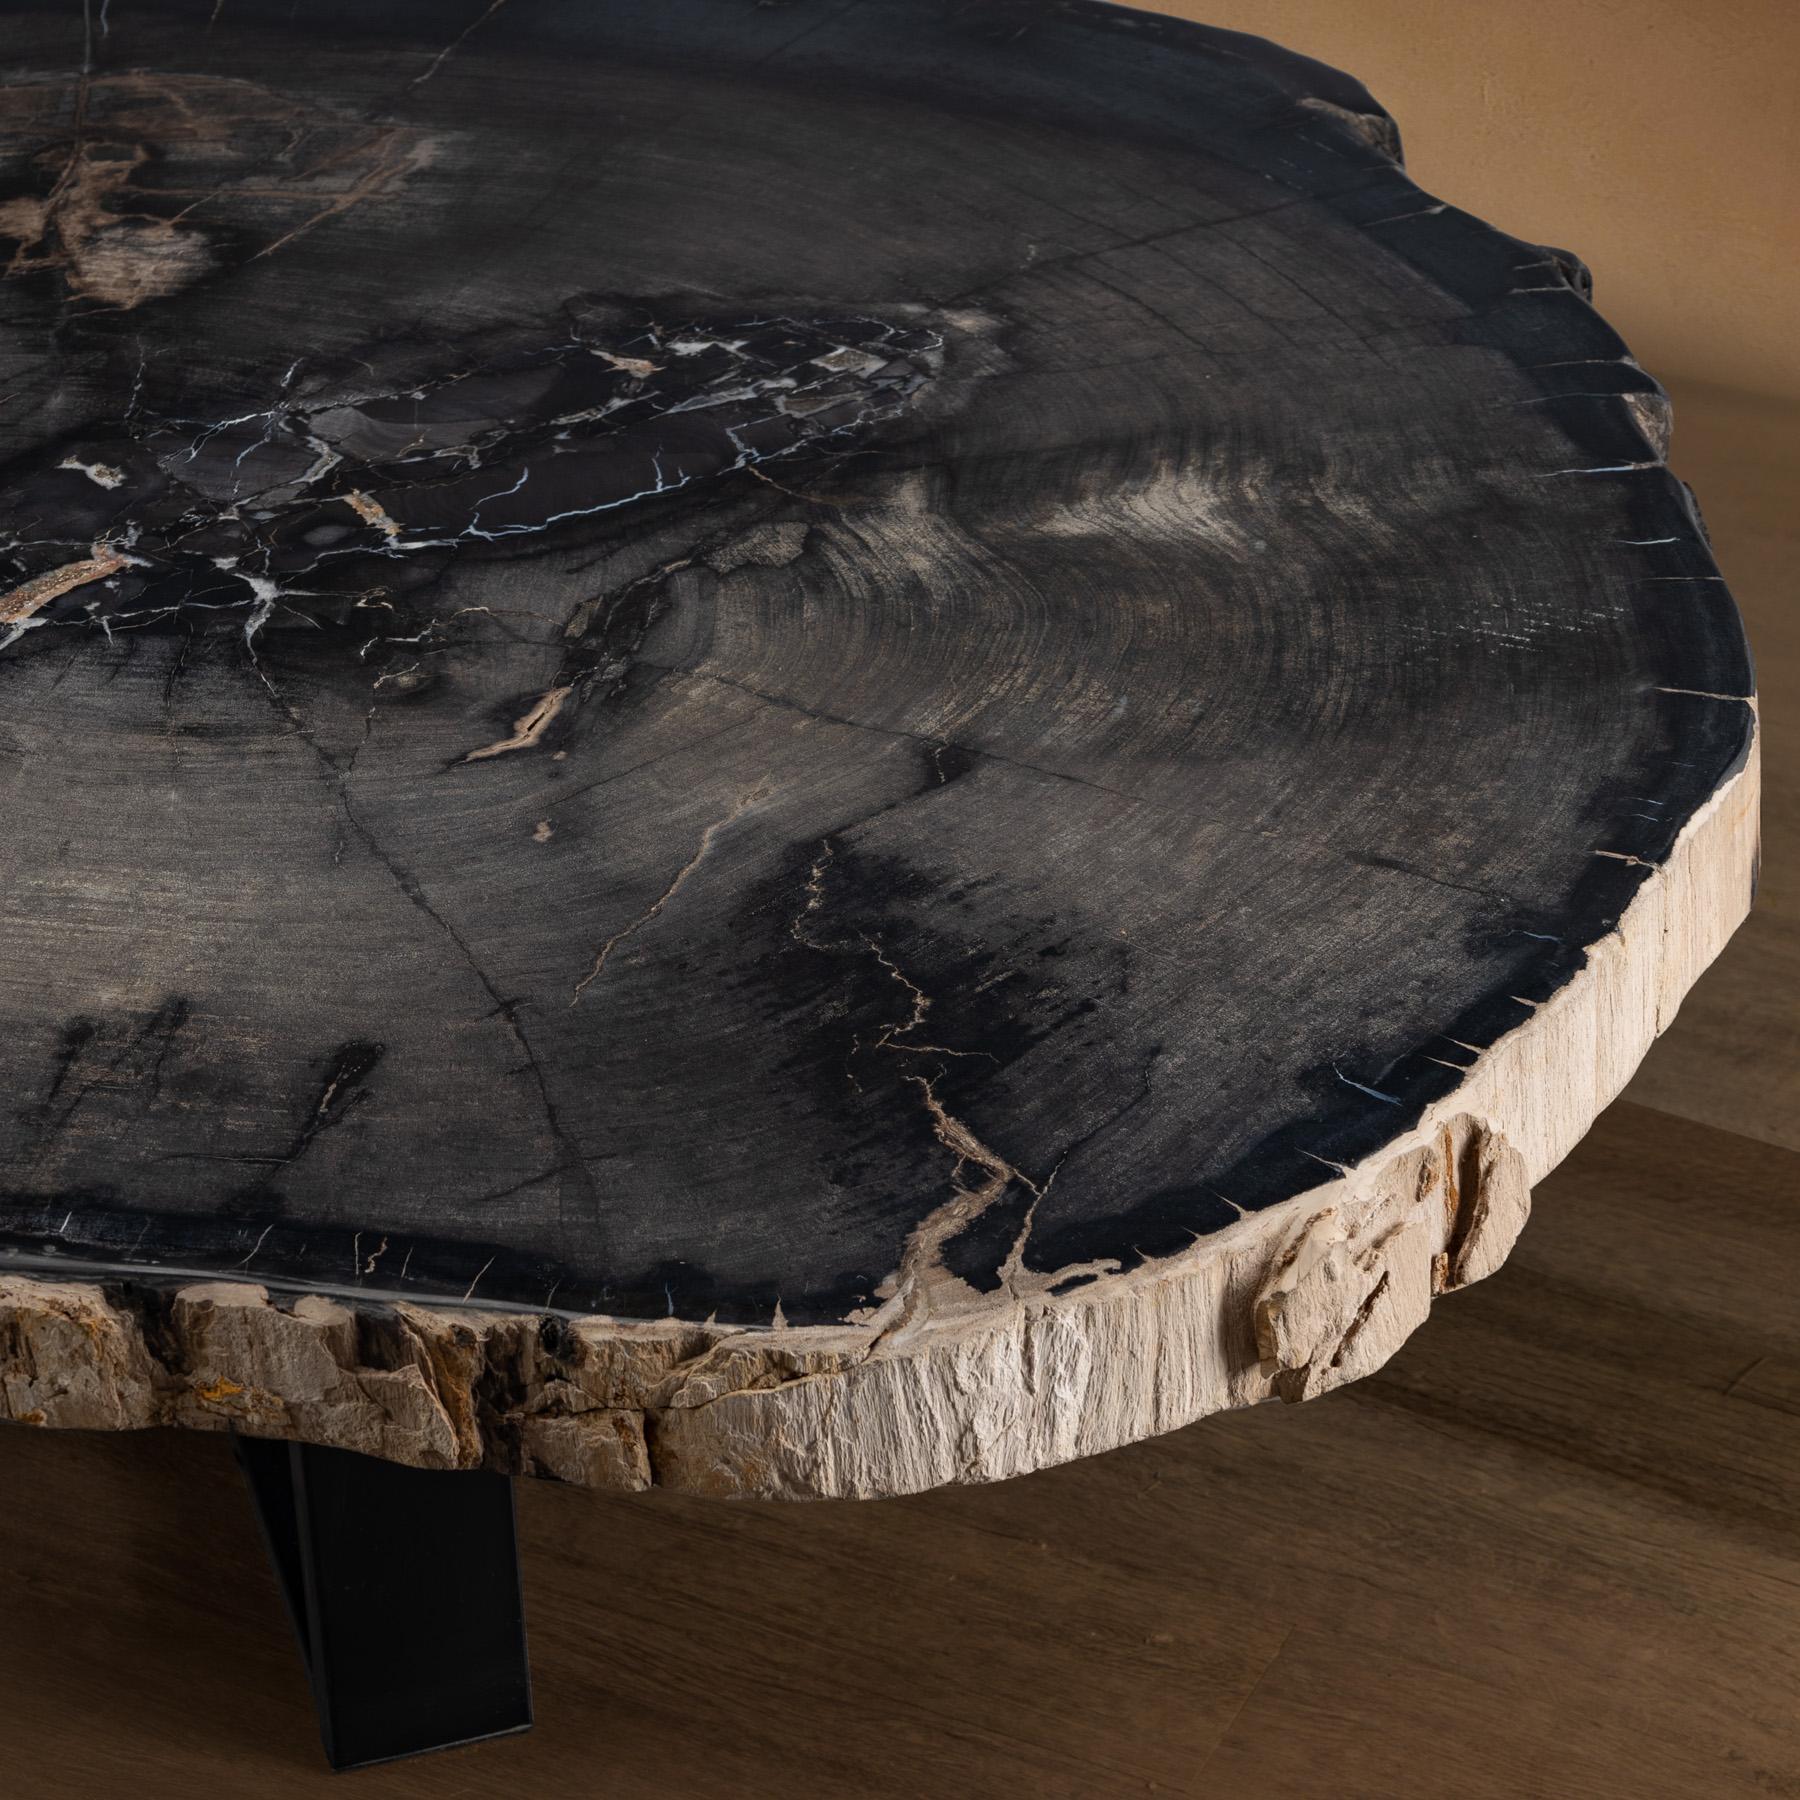 Polished Center or Coffee Table, Natural Shape, Petrified Wood with Metal Base